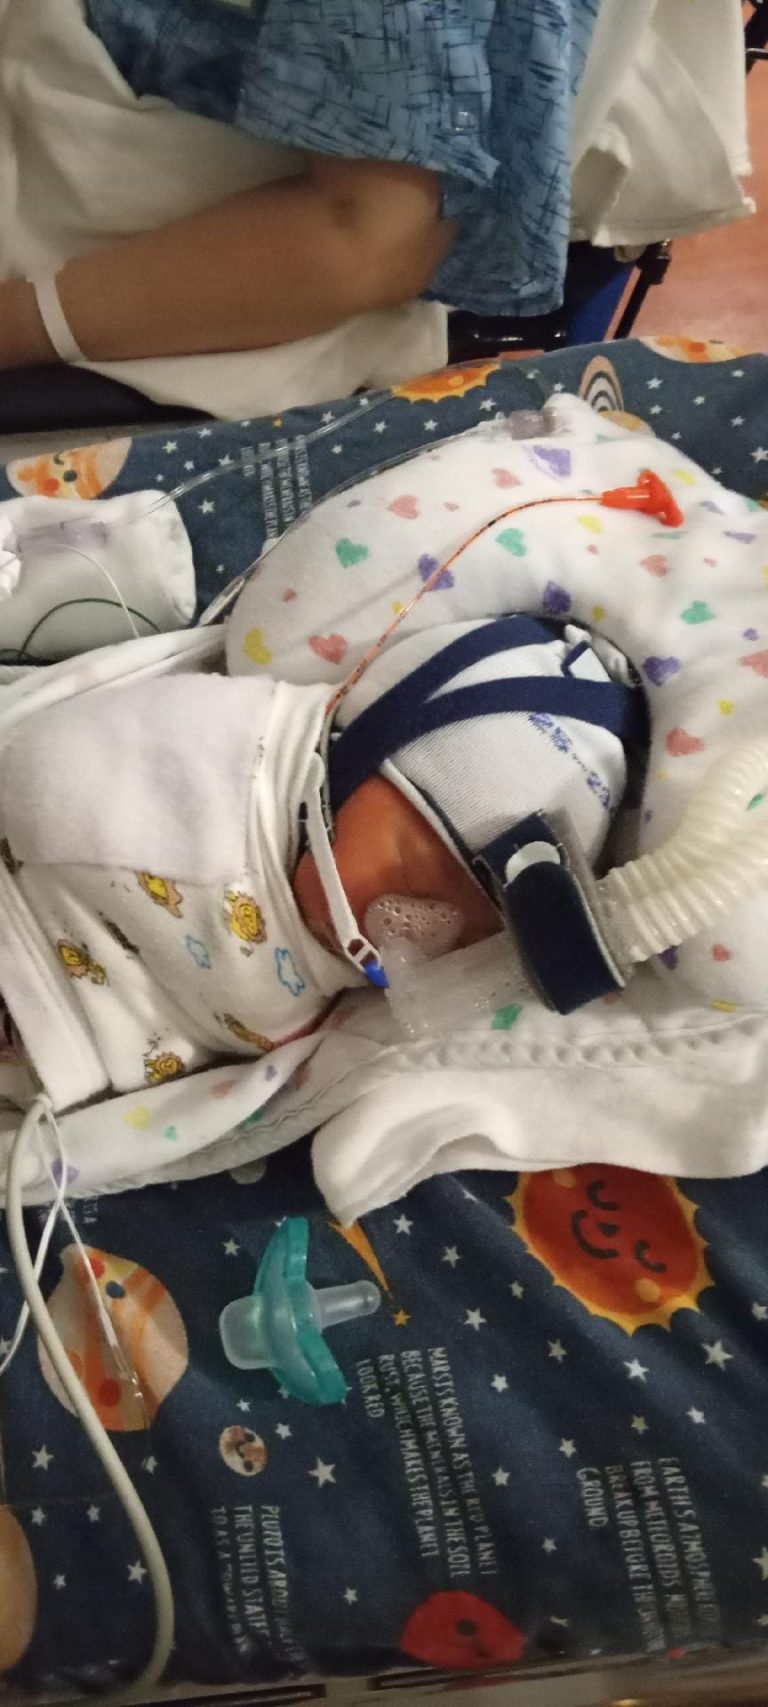 Read more about the article At Last the Parents Get to See His Face–Their Tiny NICU Baby